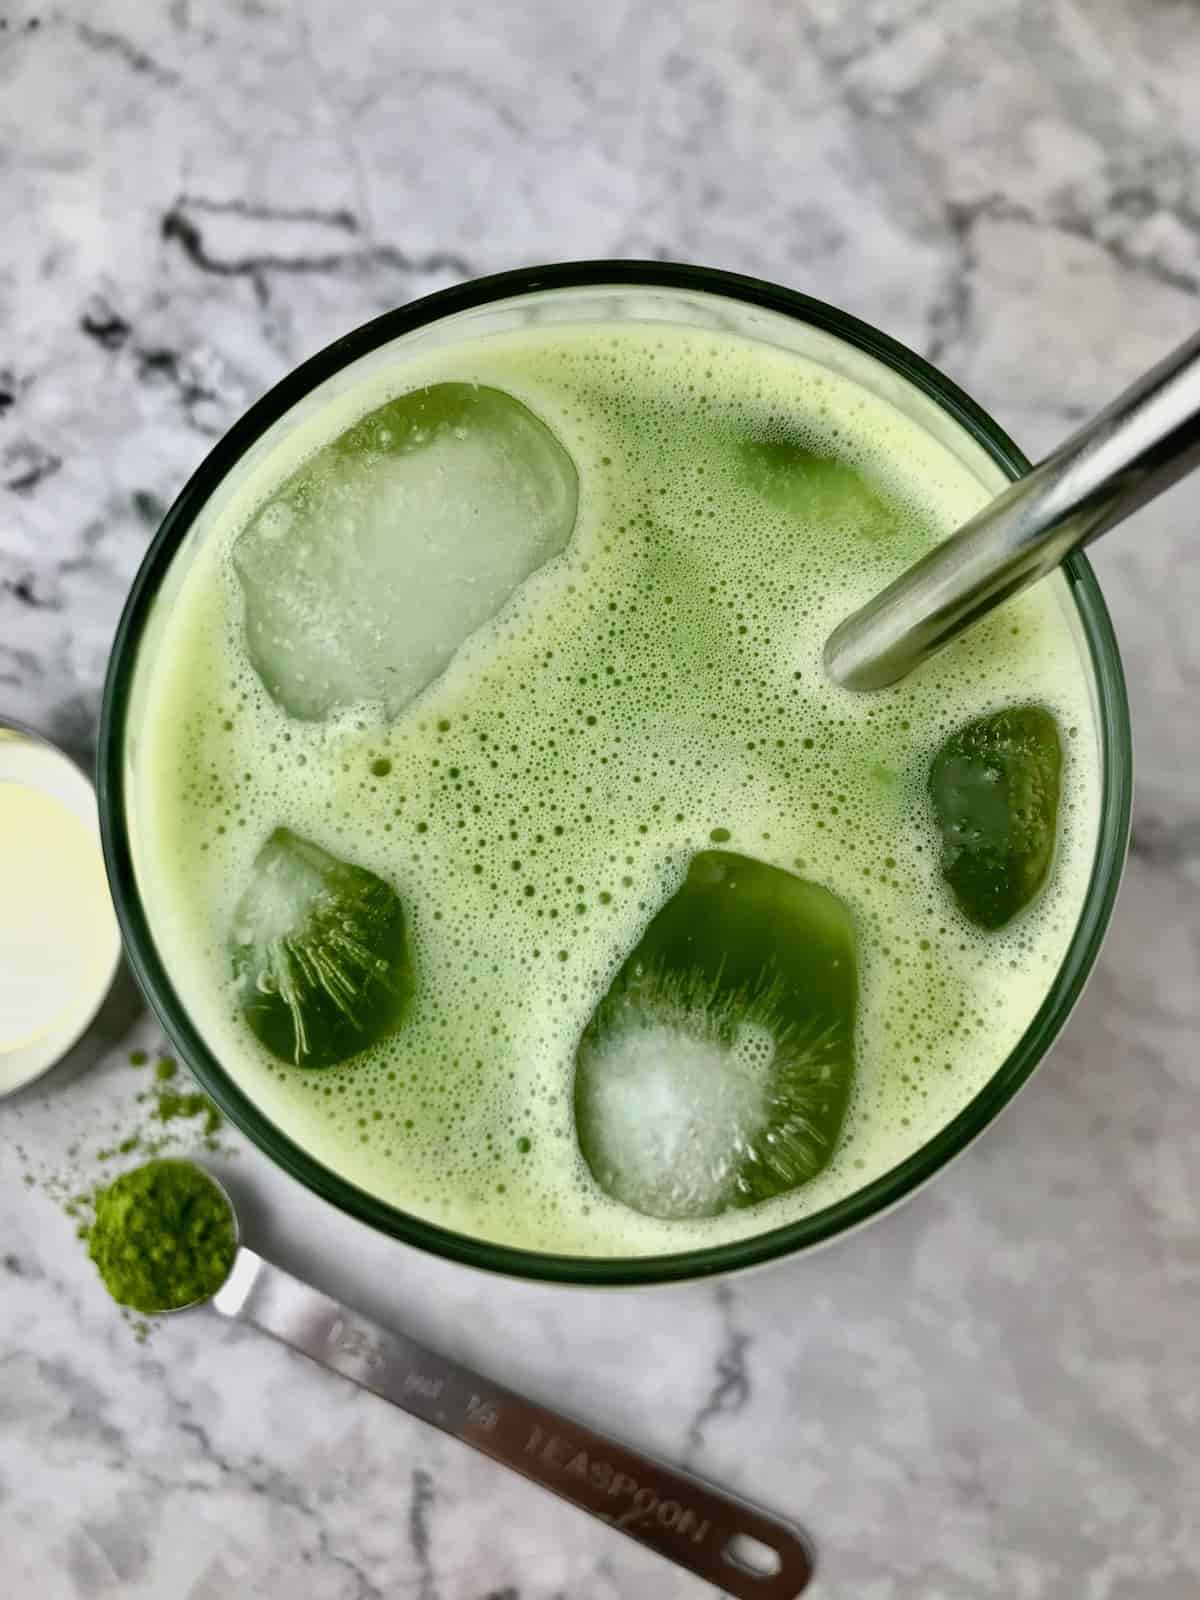 Overhead view of a glass filled with an iced matcha latte.